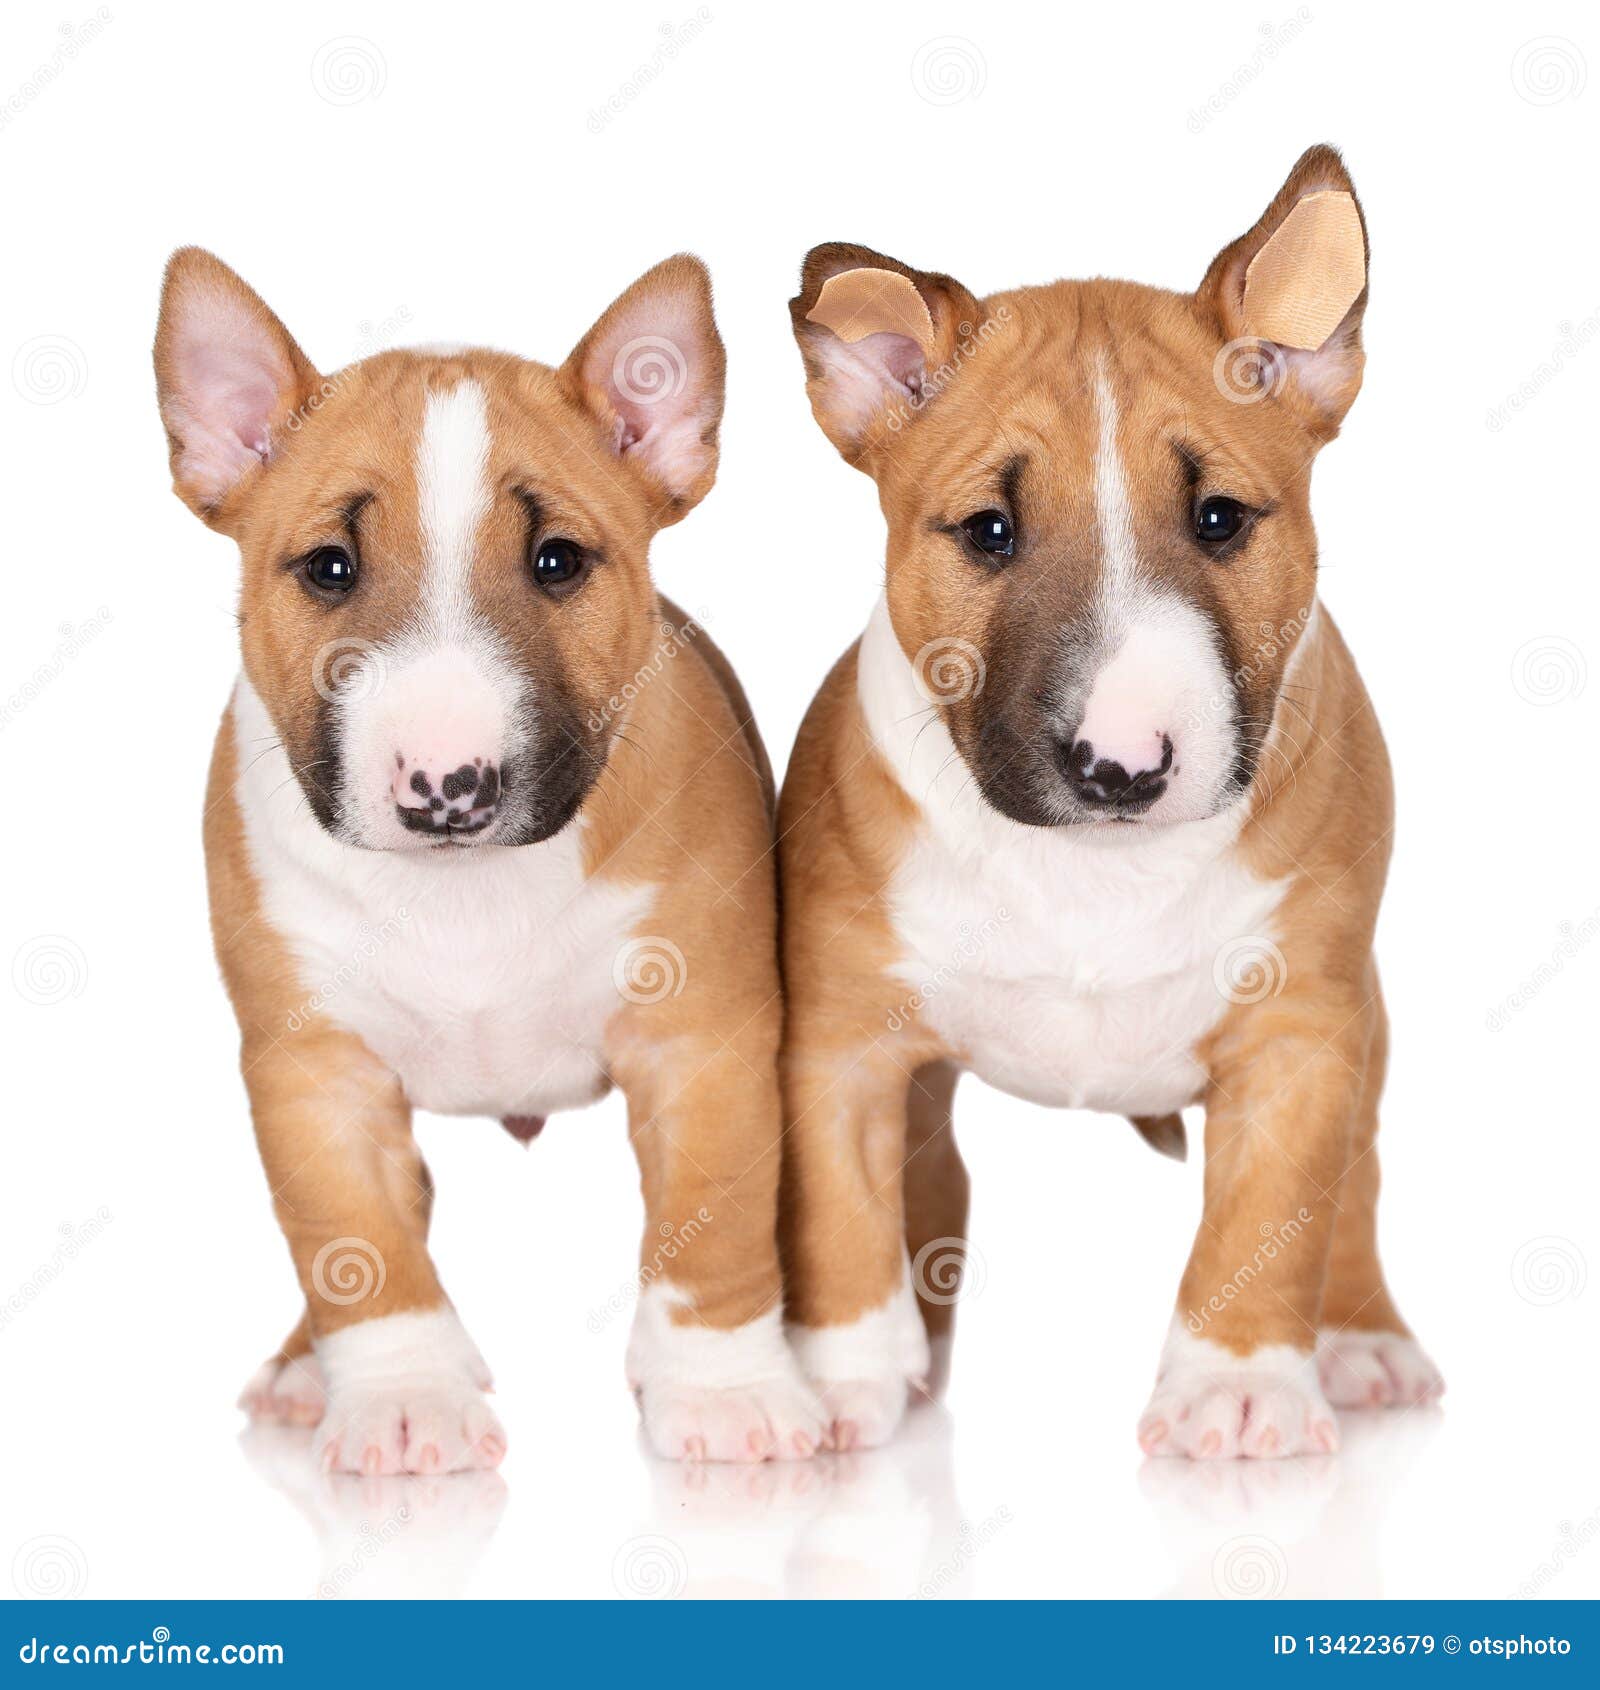 Two Miniature Terrier Puppies on White Background Stock Image - Image of white, miniature: 134223679